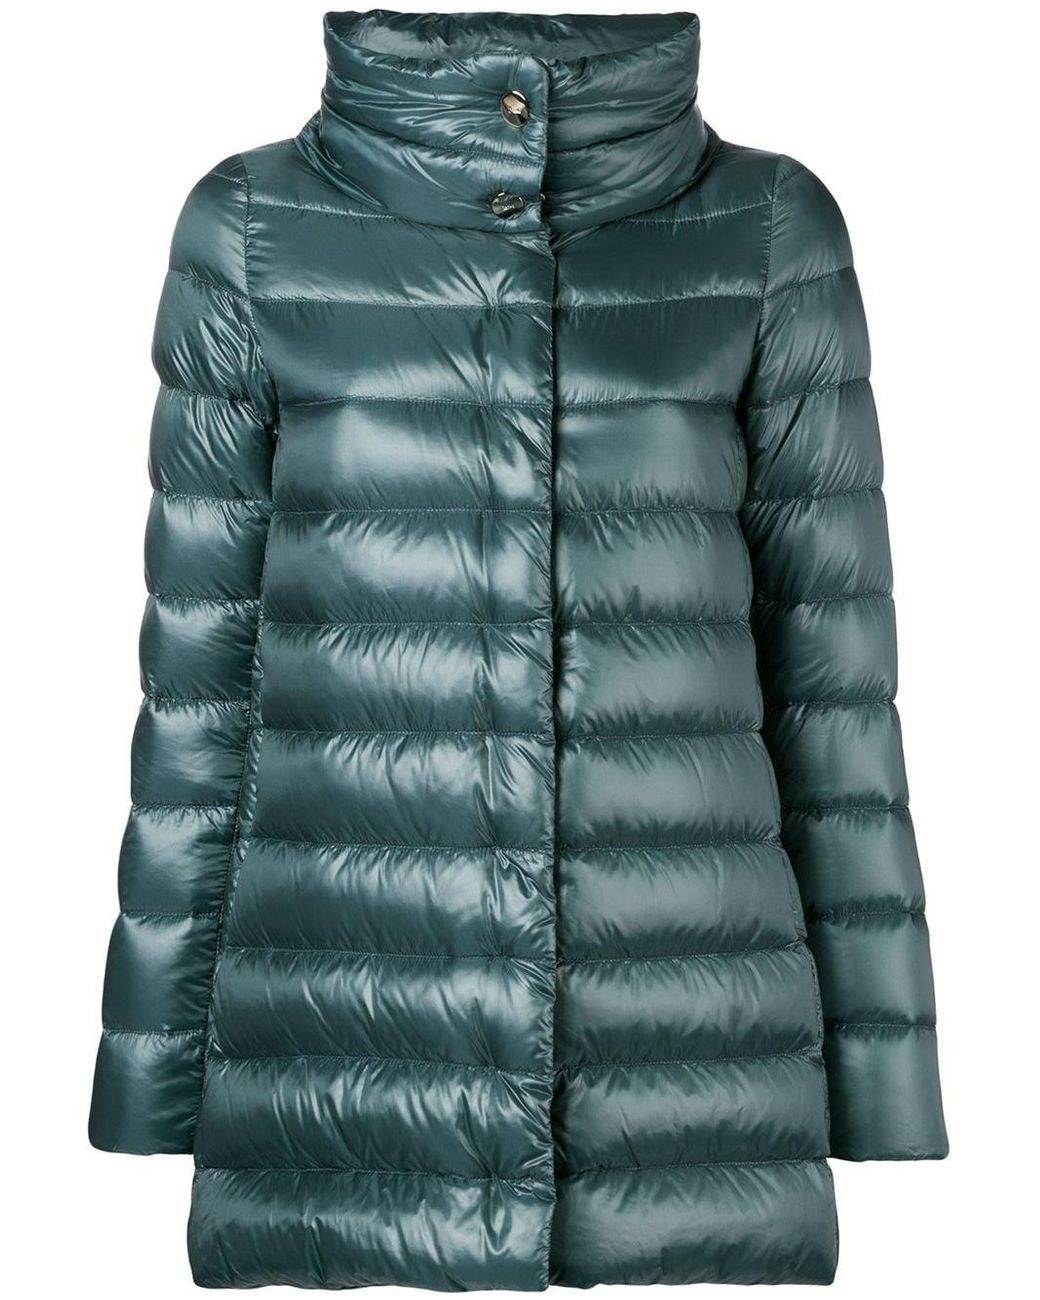 Herno Goose Amelia Padded Jacket in Green - Lyst